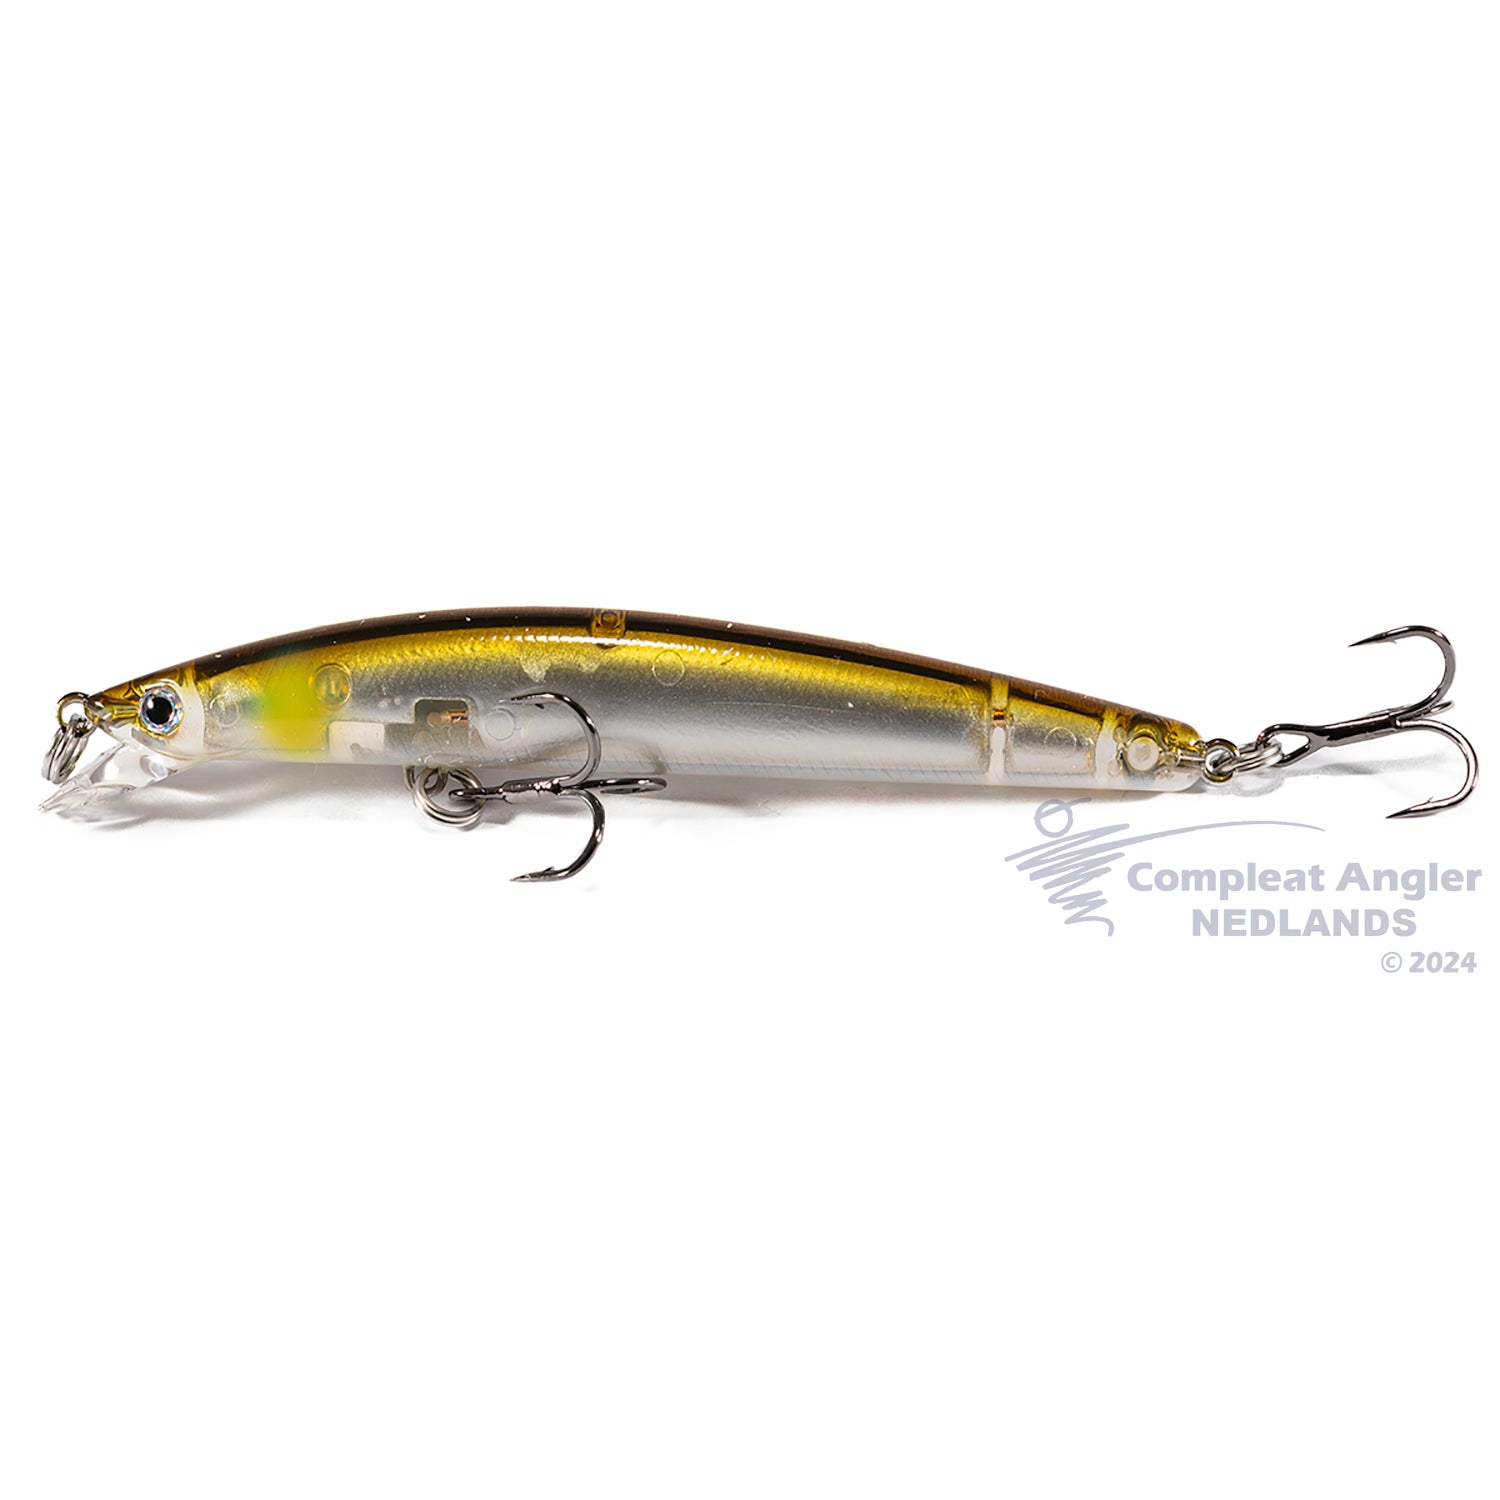 Back in action Dam Buster - LURELOVERS Australian Fishing Lure Community